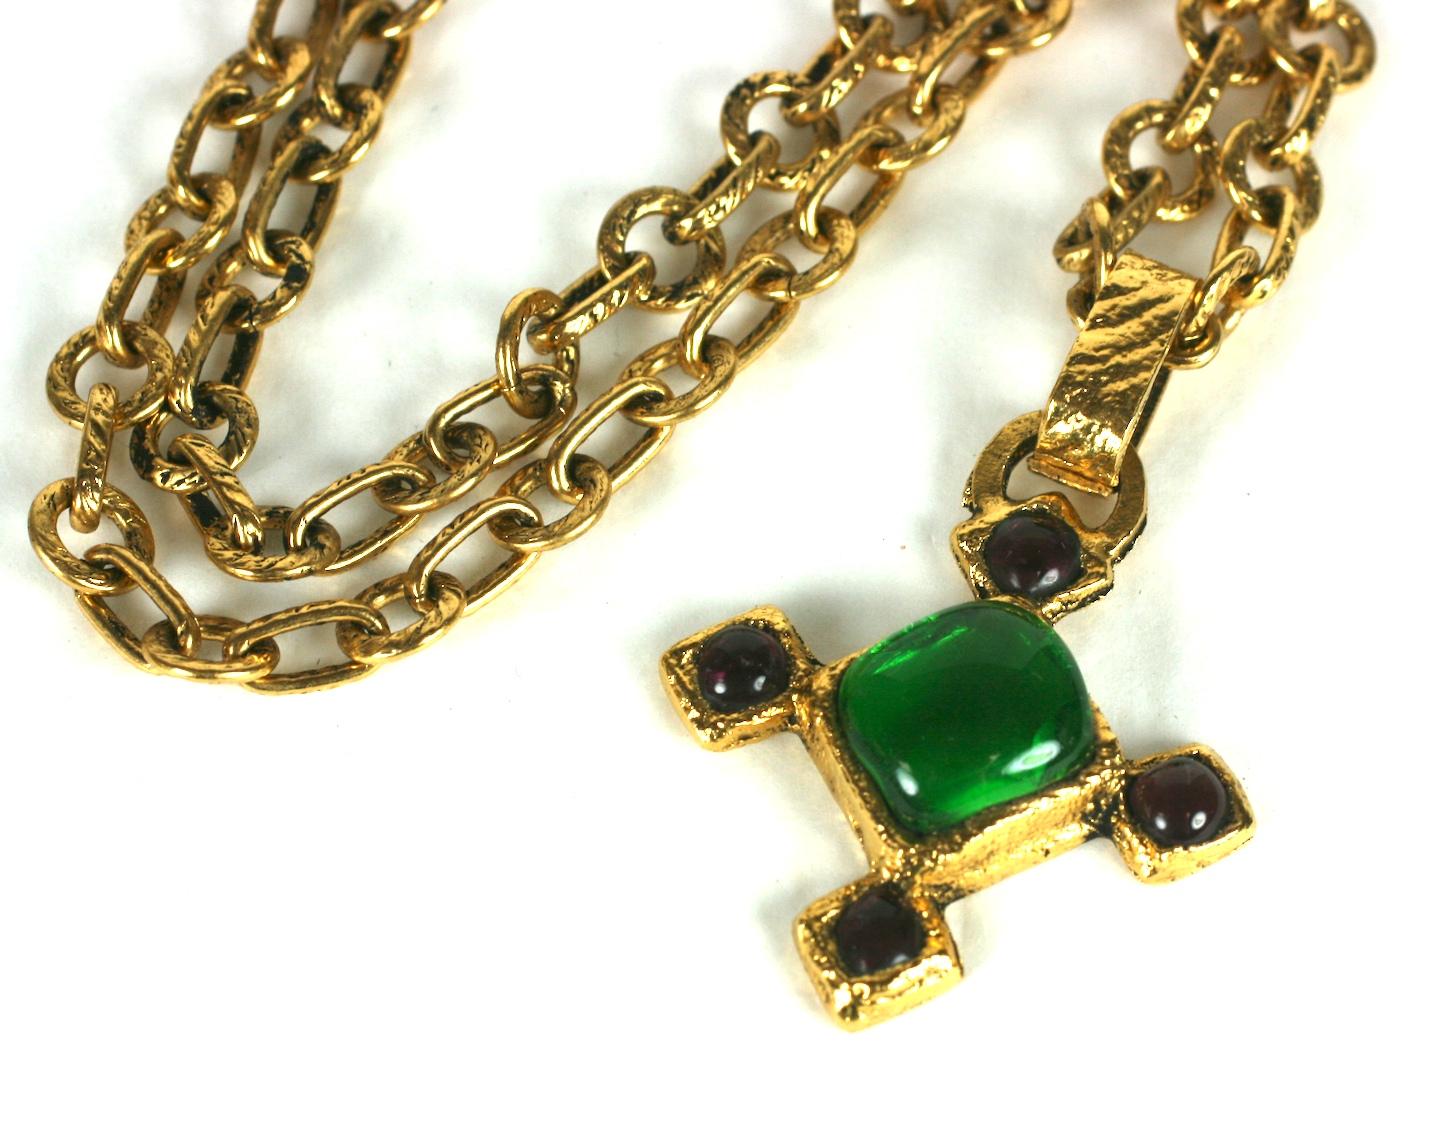 Chanel Cross Pendant in gilt bronze with amythest and emerald poured glass. Ornate gilt bronze link chain with hook closure. 
Chain 32